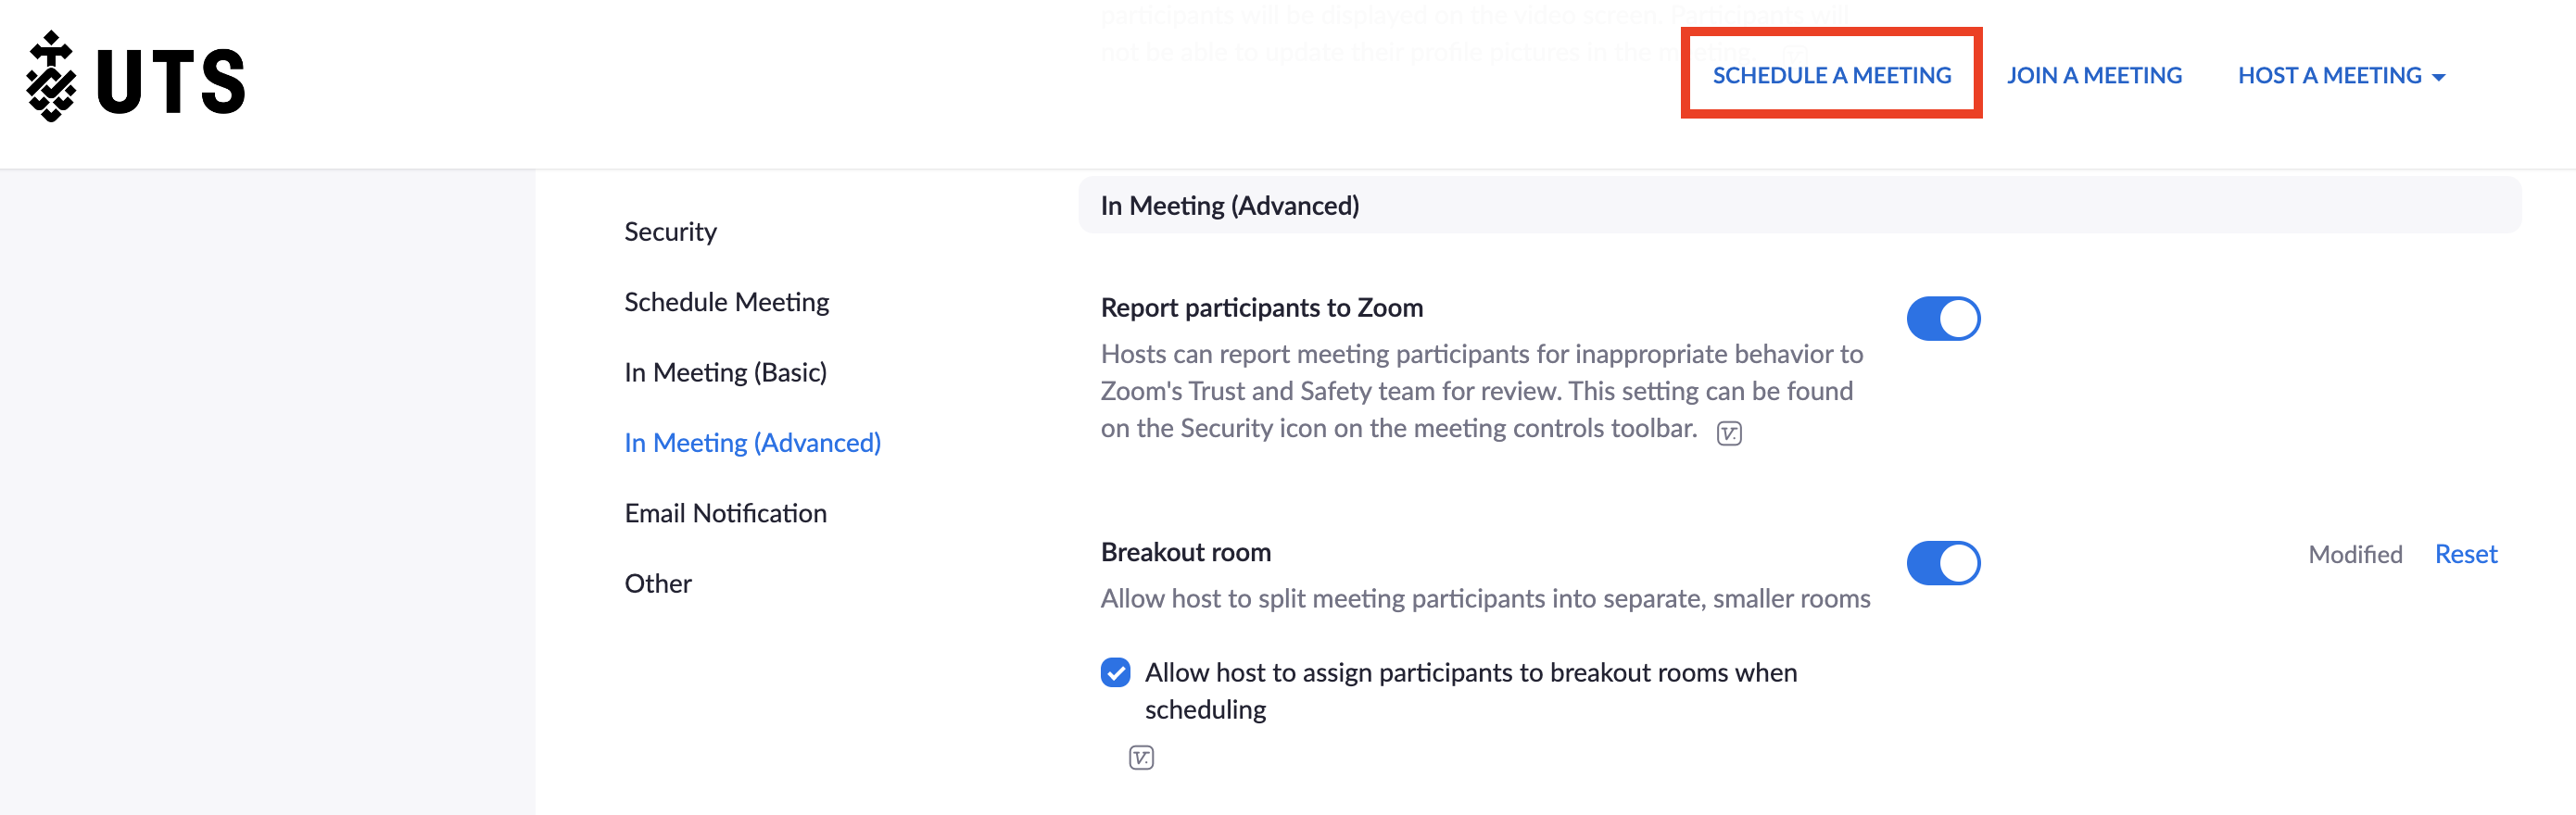 Screenshot of UTS Zoom portal with 'Schedule a Meeting' link highlighted